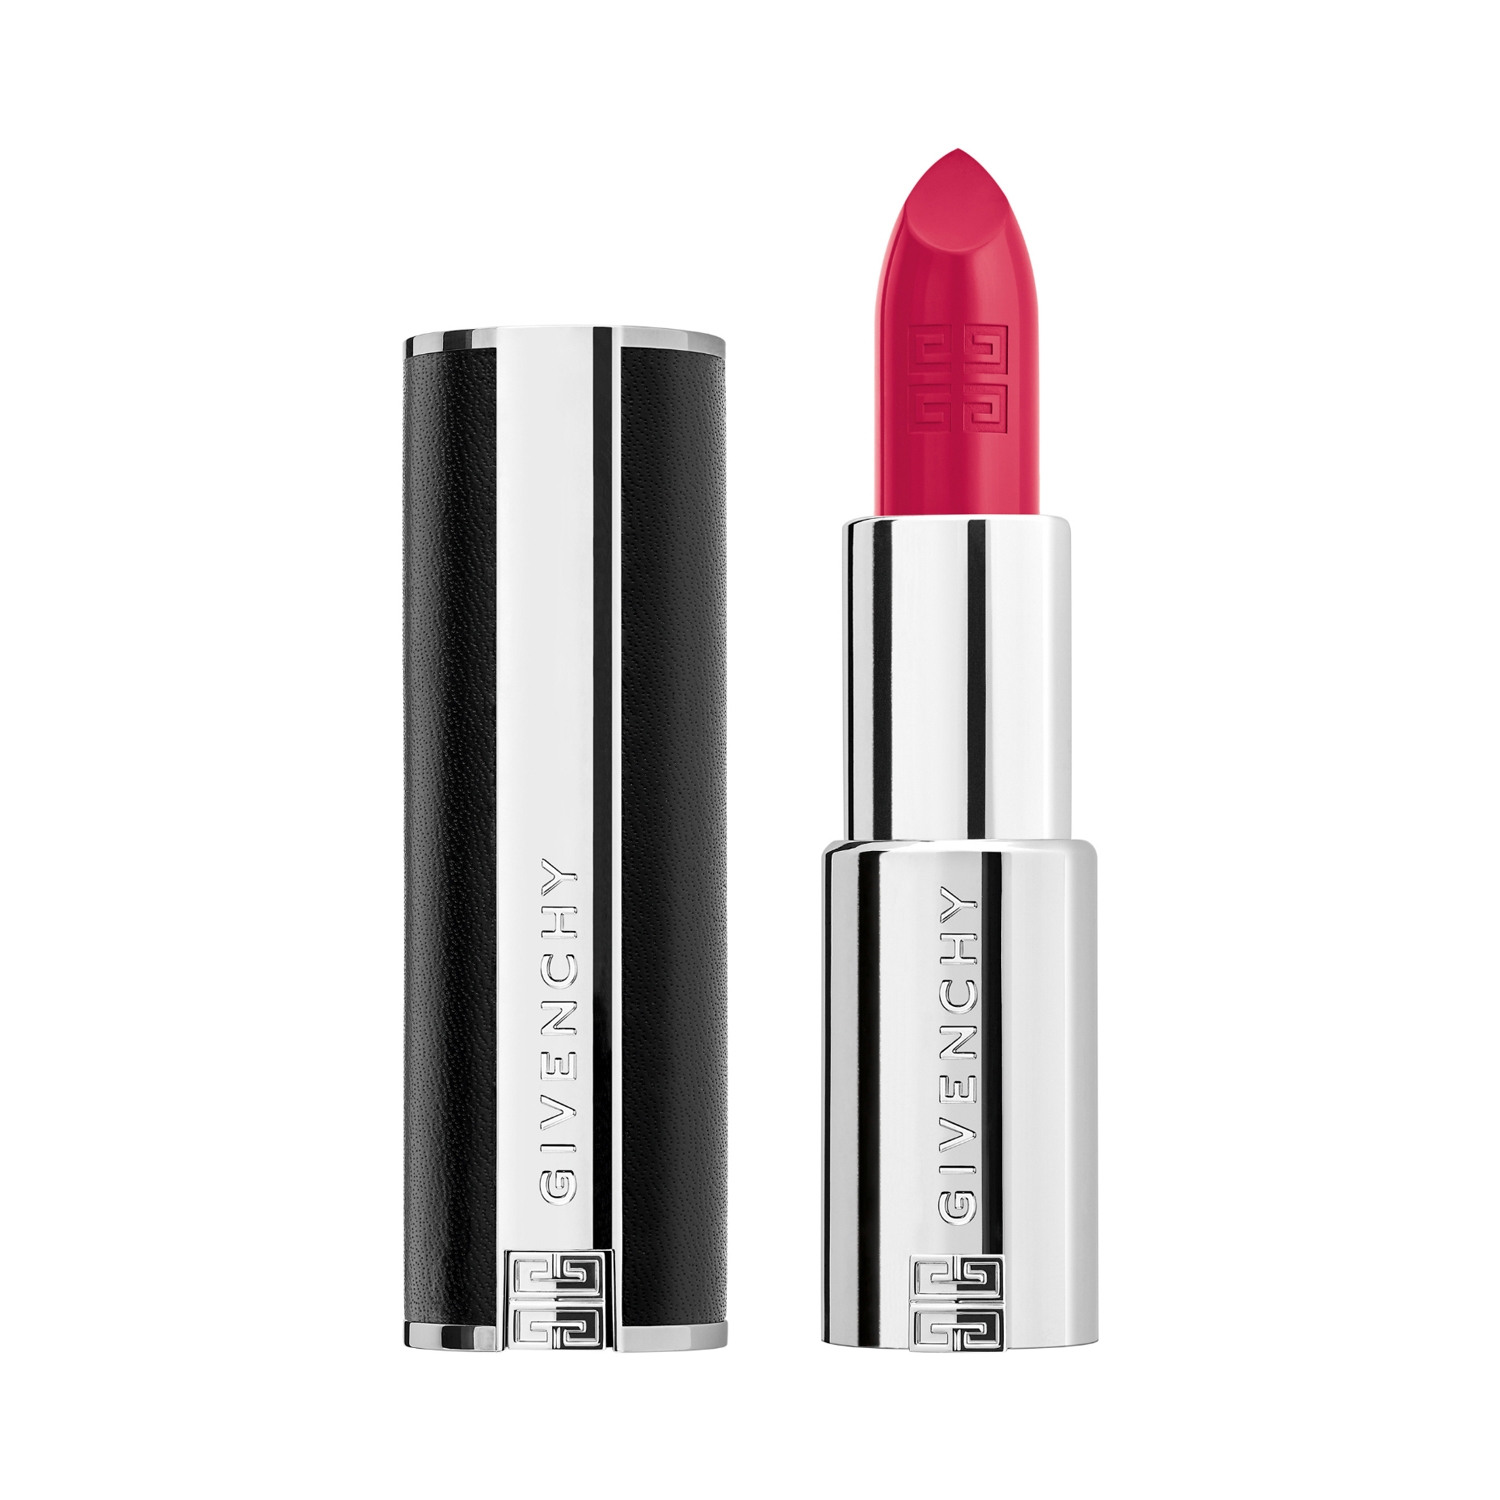 Givenchy | Givenchy Le Rouge Interdit Intense Silk Lipstick - N 338 Rouge​ Vigne (3.4g)